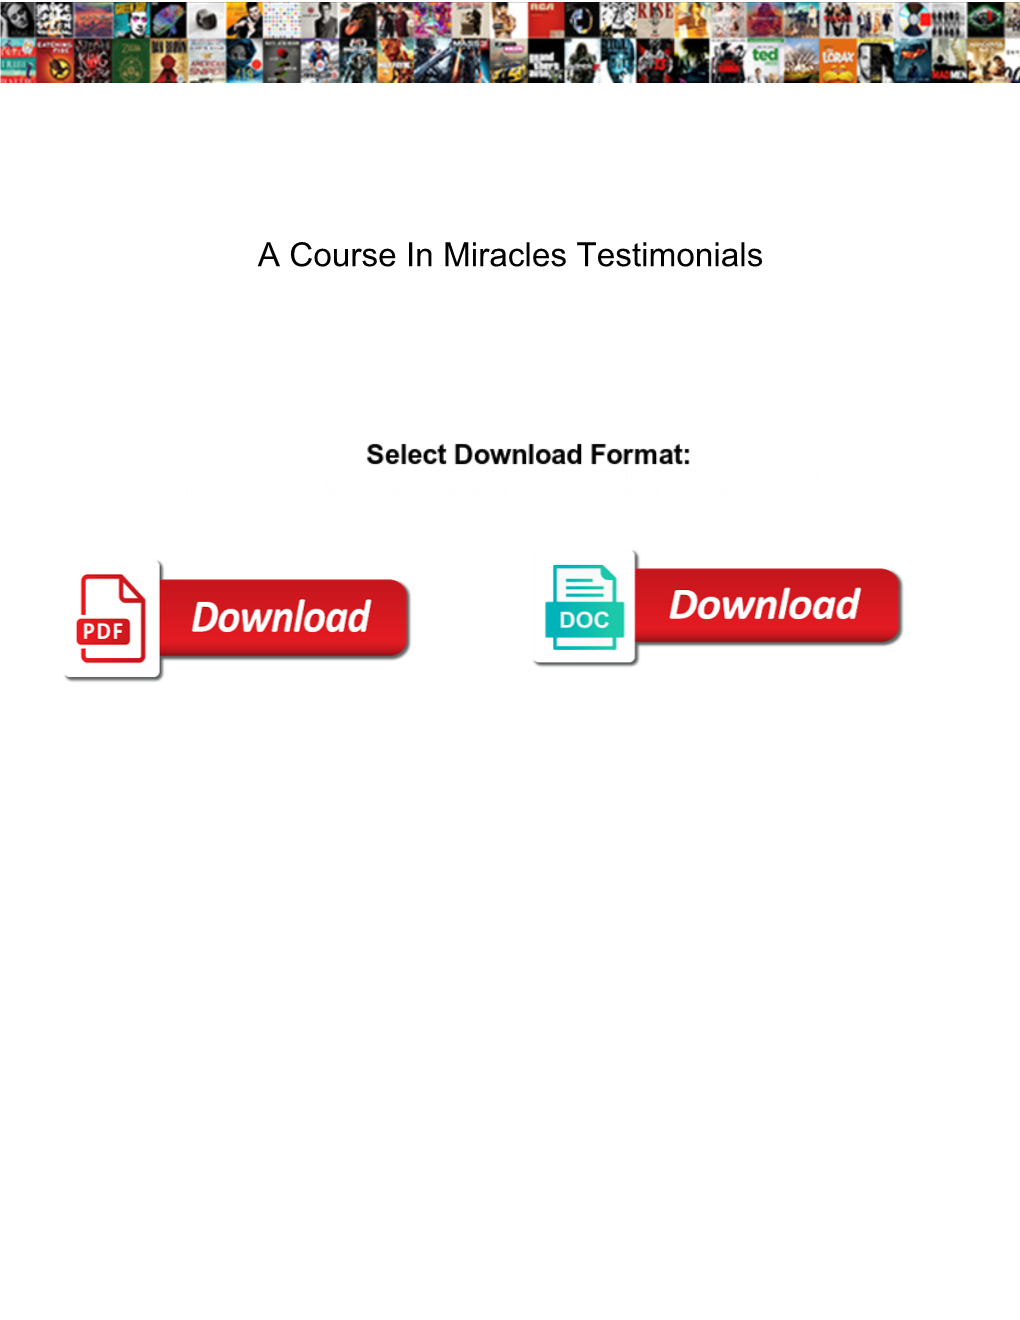 A Course in Miracles Testimonials